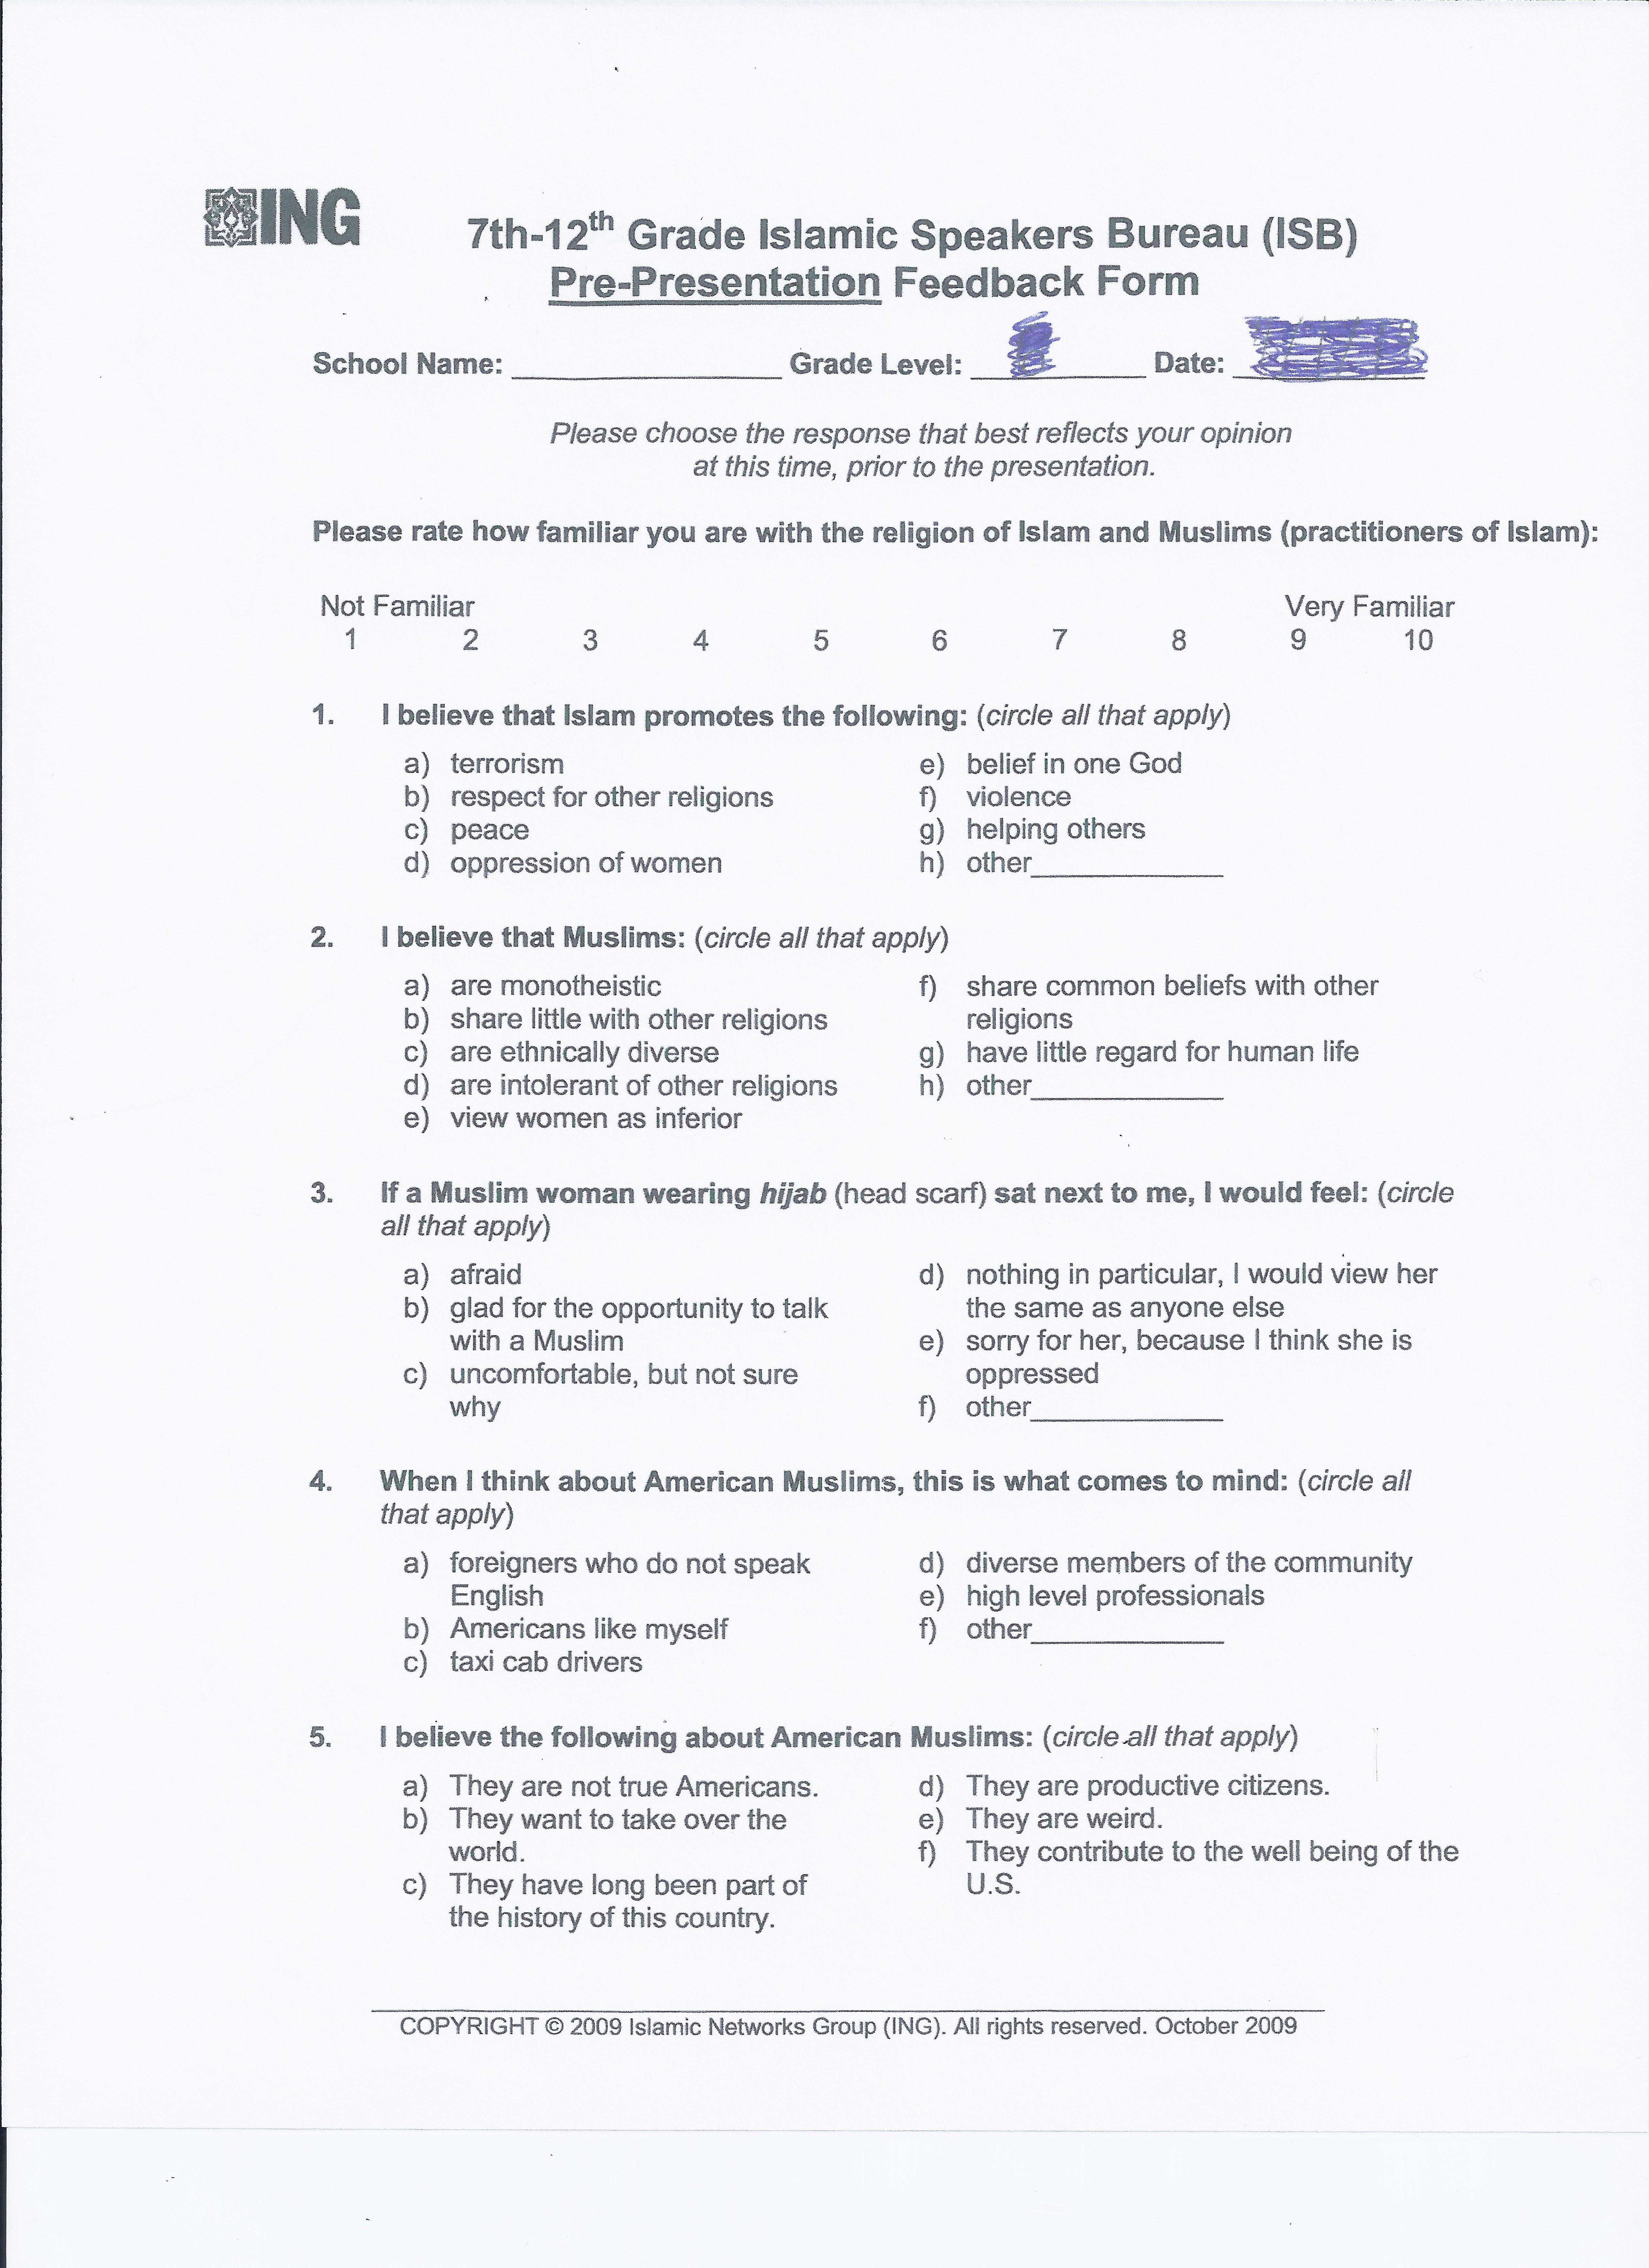 ISB Survey Page 1